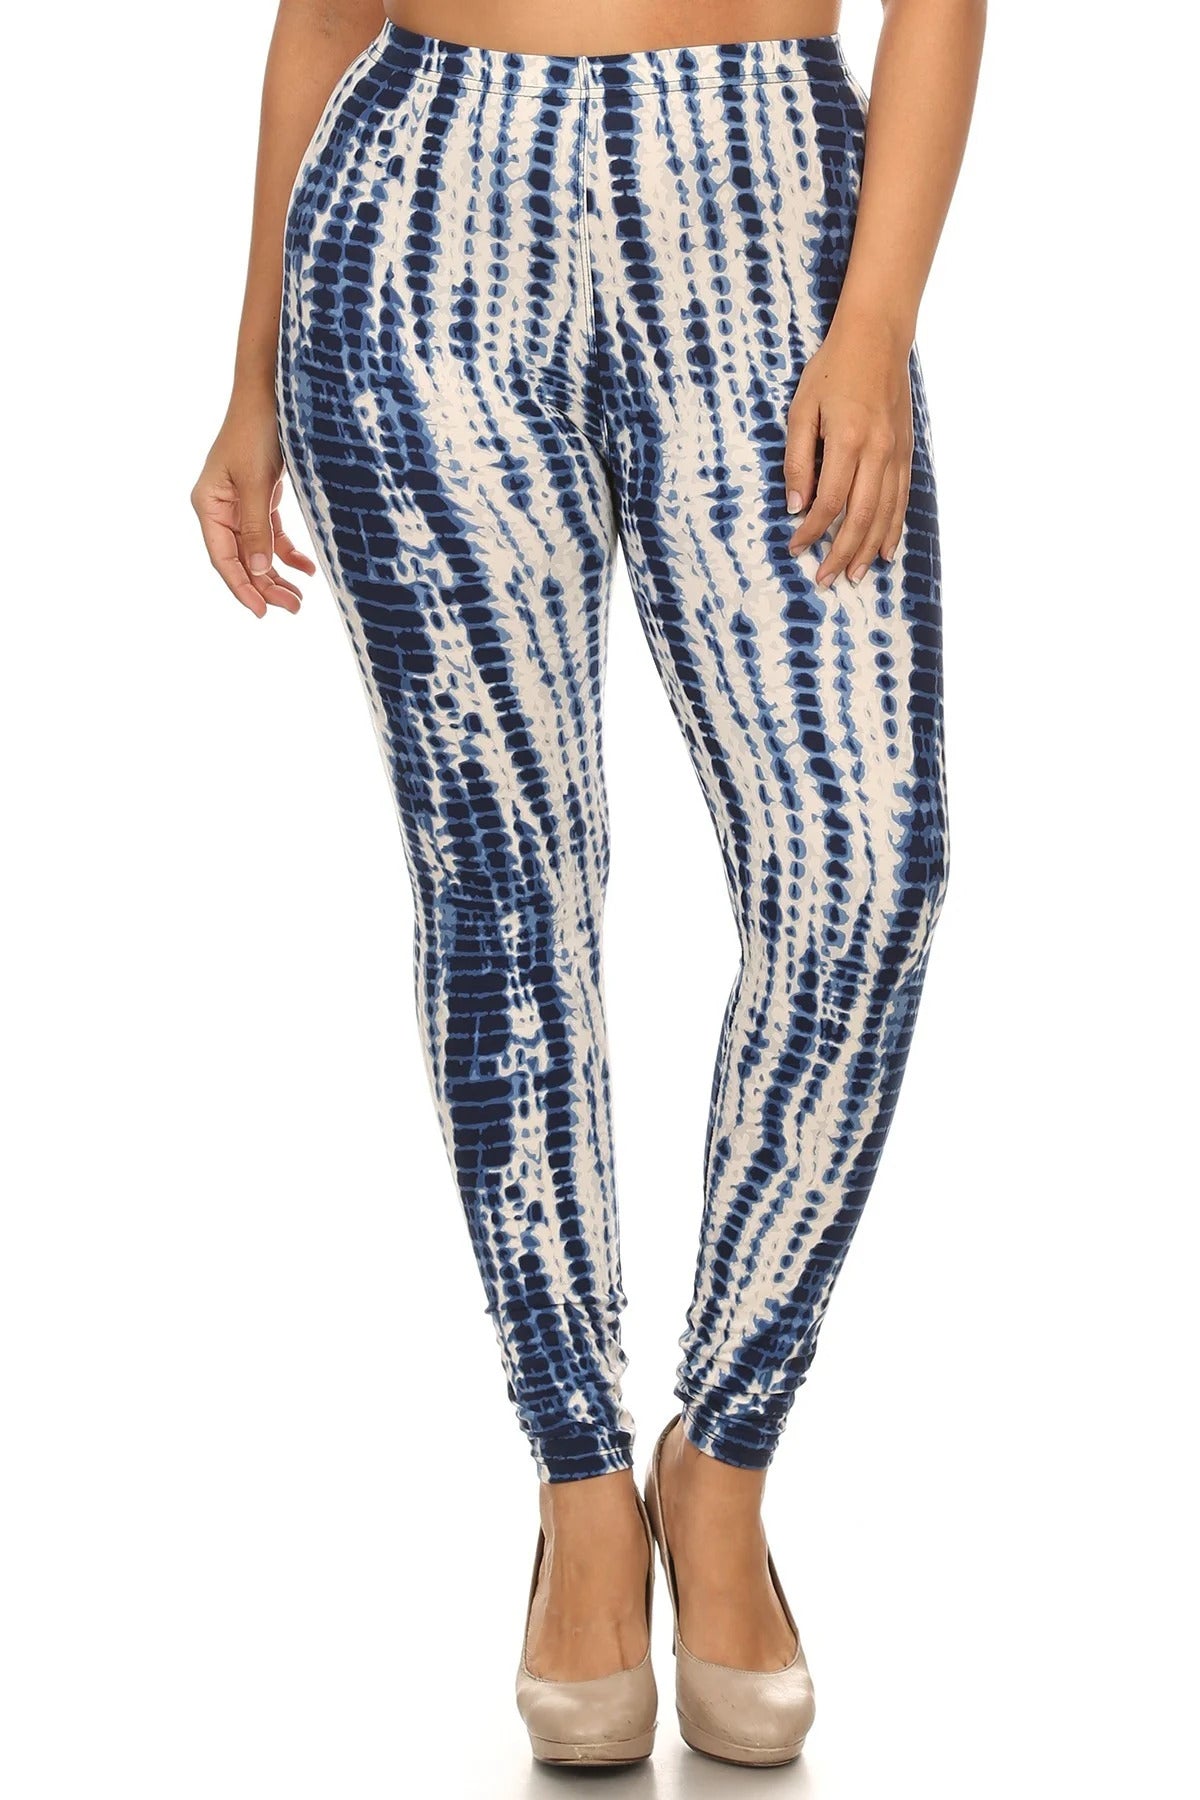 Multi One Size Fits Most - Voluptuous (+) Plus Size Tie Dye Print, Full Length Leggings In A Slim Fitting Style With A Banded High Waist - womens leggings at TFC&H Co.